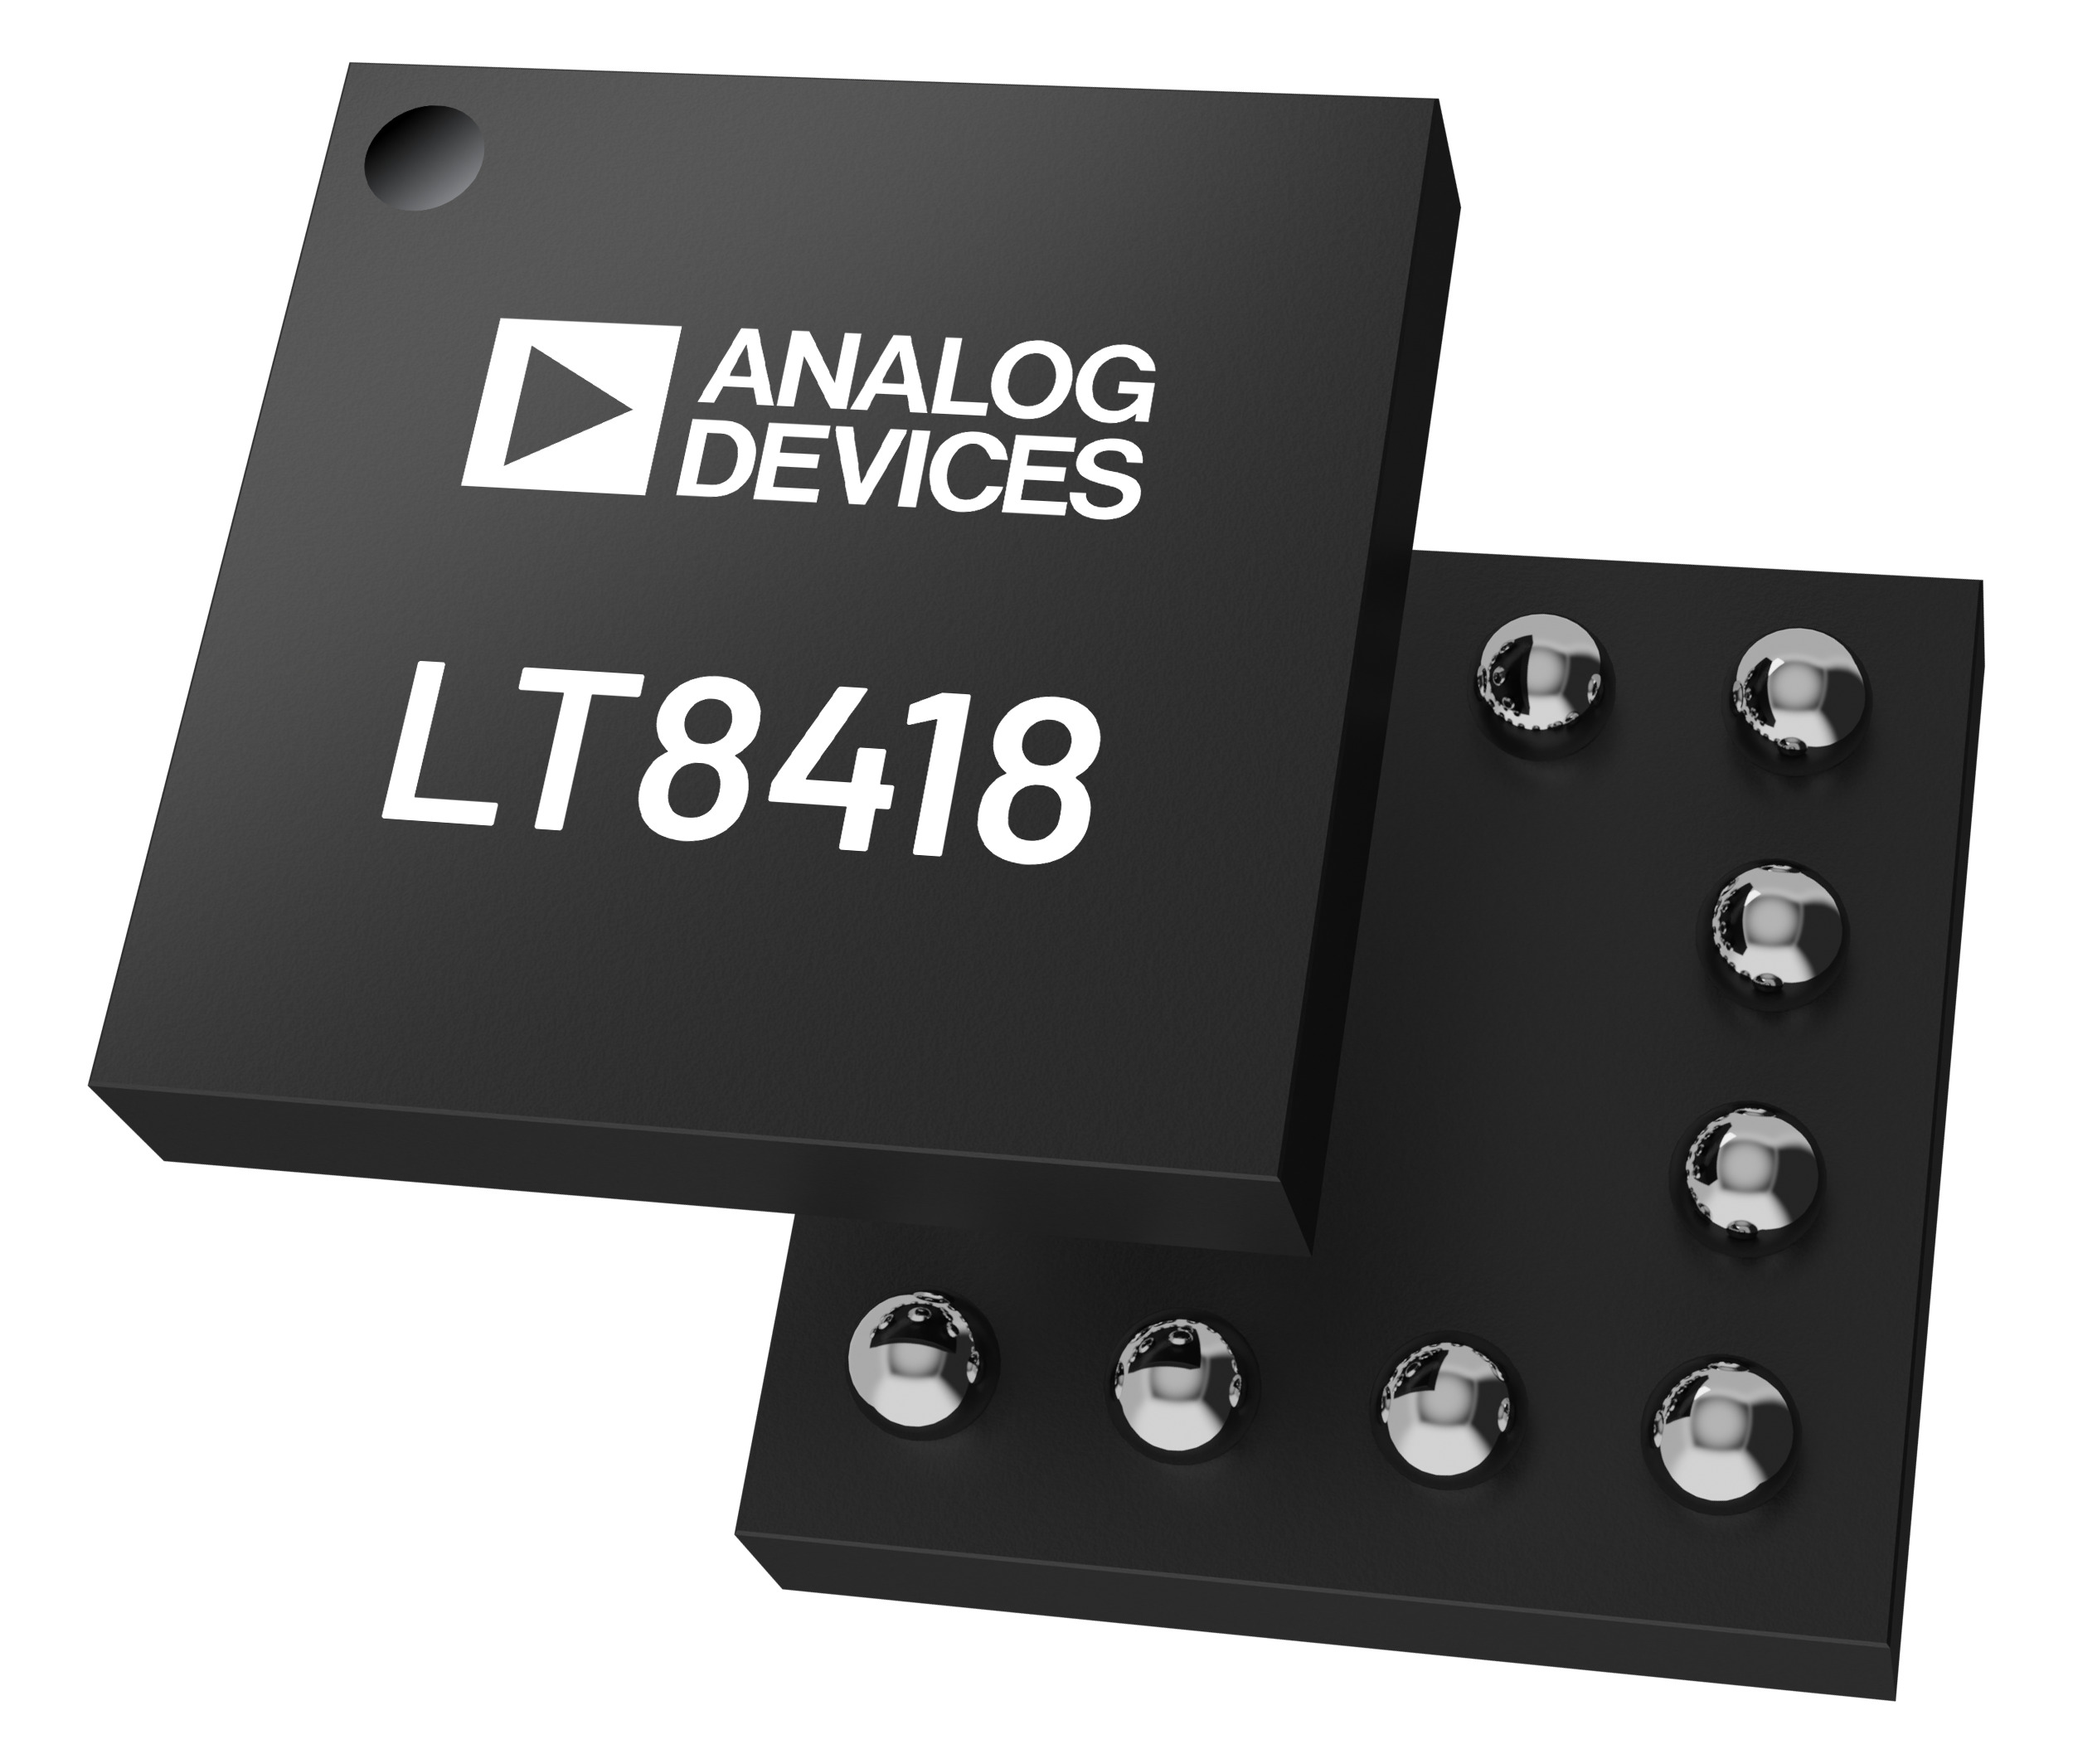 Analog Devices' GaN Driver Enables Robust and Reliable Control of GaN FETs